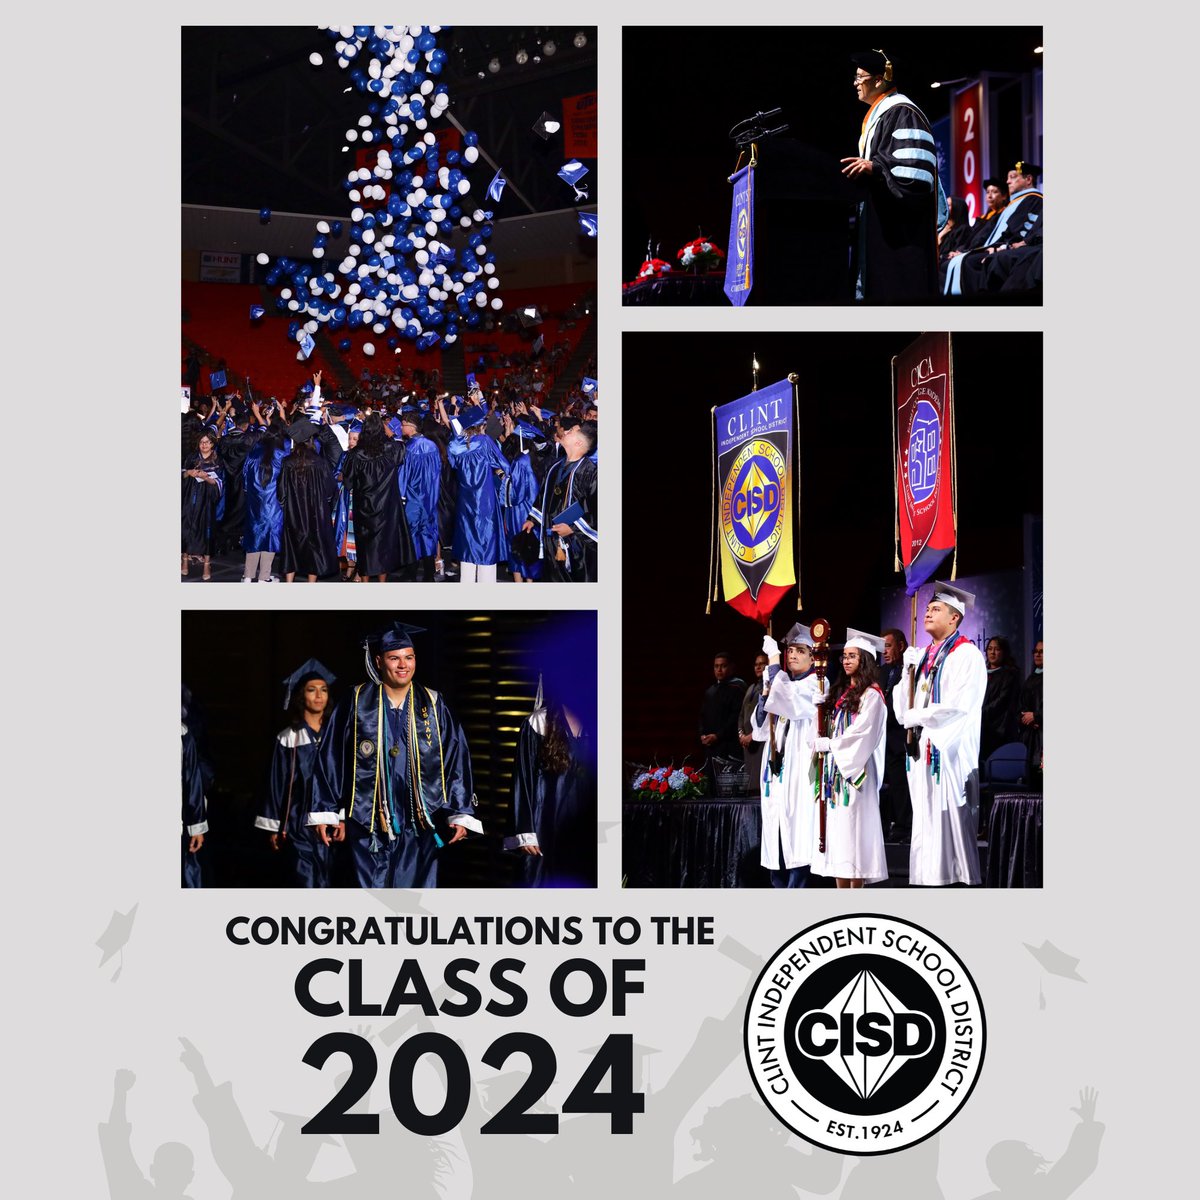 Graduation dates for our class of 2024 will be: CECA- May, 28, 2024 at 3PM Clint High School- May 28, 2024 at 7PM Mountain View High School- May 29, 2024 at 3PM Horizon High School- May, 29, 2024 at 7PM All graduations will take place at the Don Haskins Center. 👩‍🎓🧑‍🎓🎓🎉